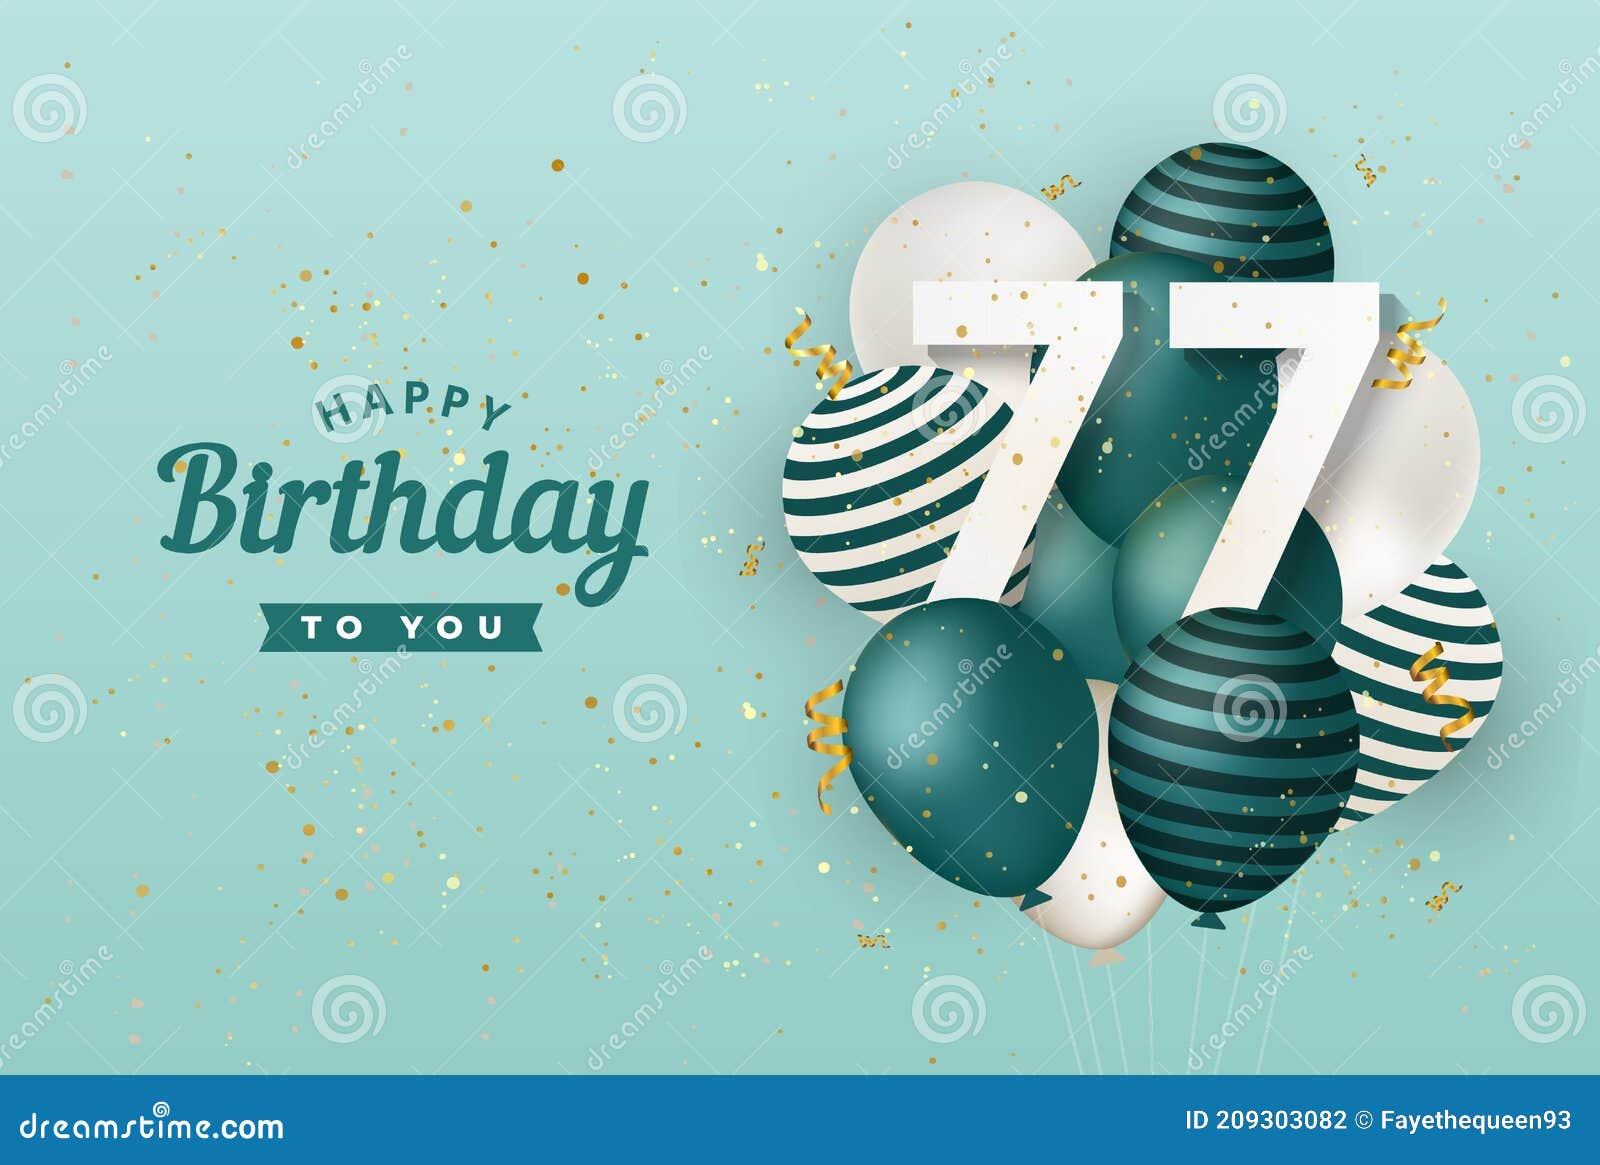 Happy 77th Birthday with Green Balloons Greeting Card Background. Stock